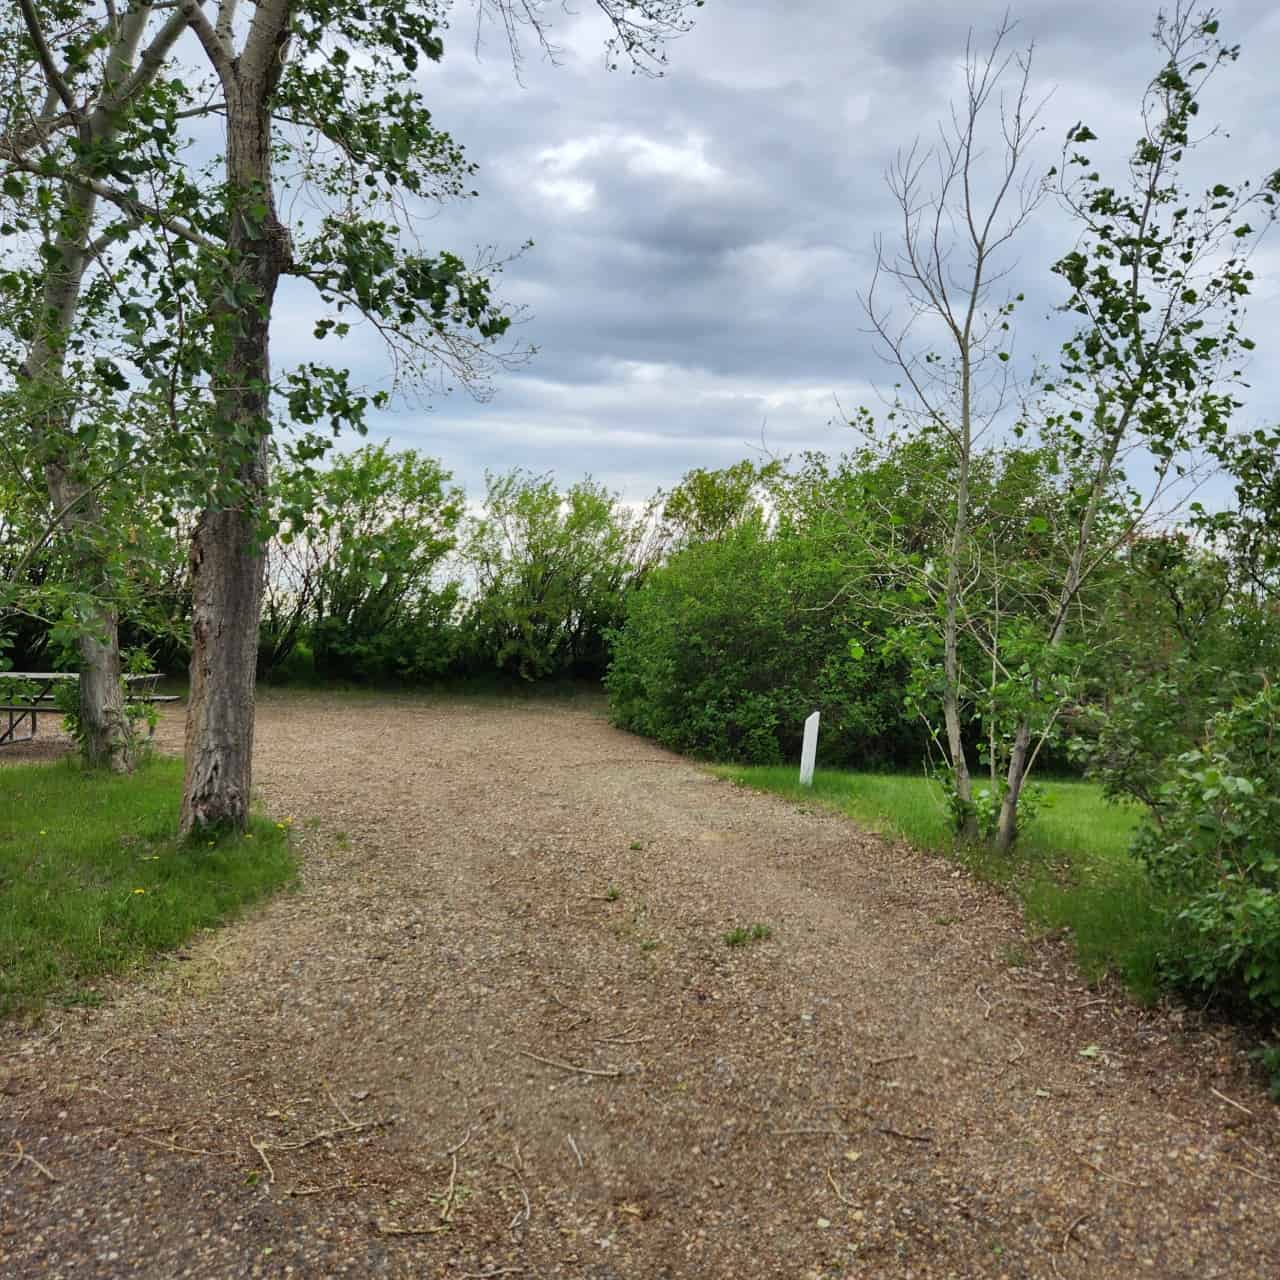 Camping Available at Cavan Lake in Cypress County - Nice decent sized lots available for camping. The Cypress County has so much to explore, this would be a great Basecamp location. 